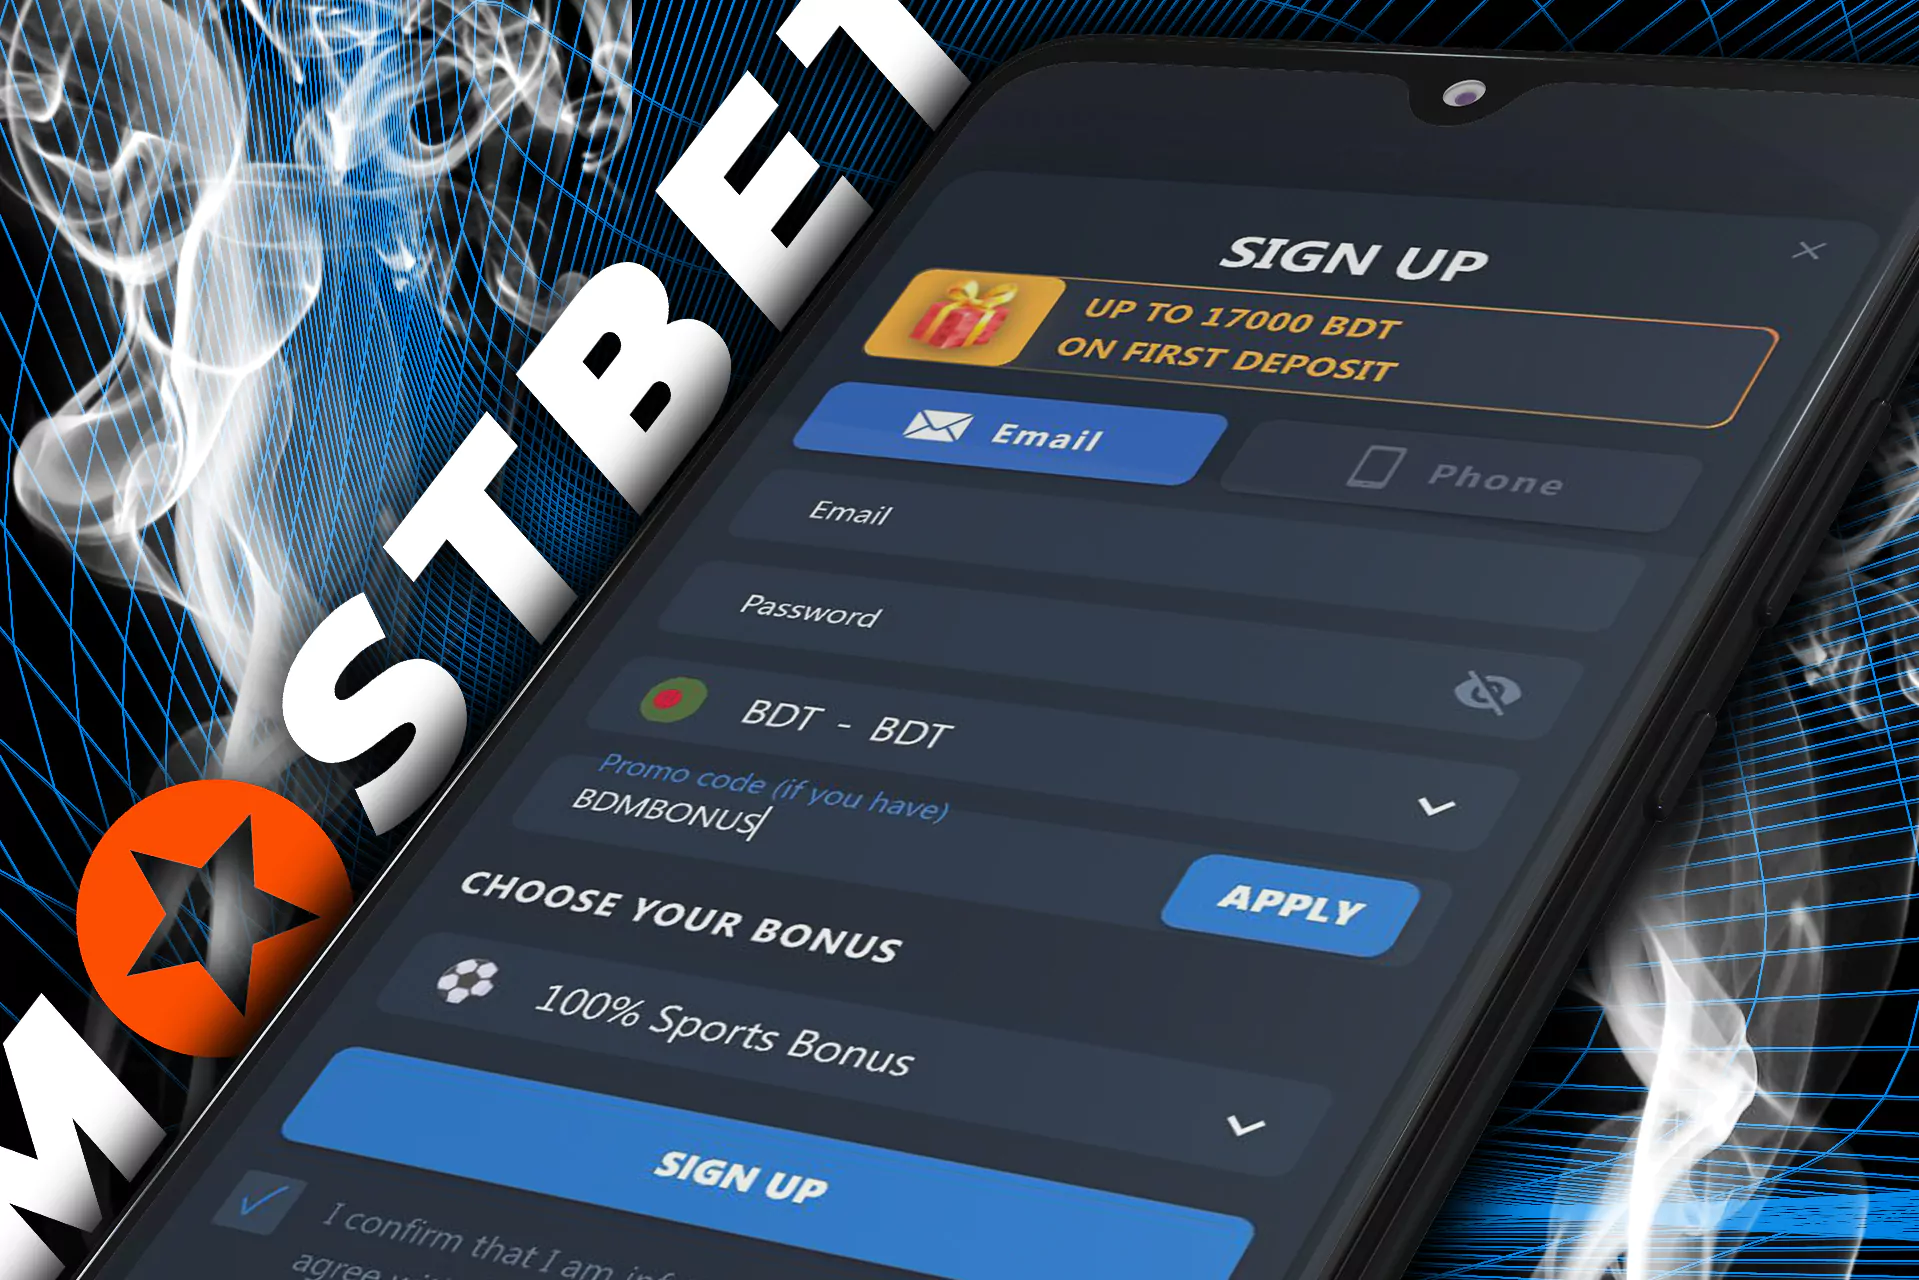 How To Find The Time To Bookmaker Mostbet and online casino in Kazakhstan On Facebook in 2021